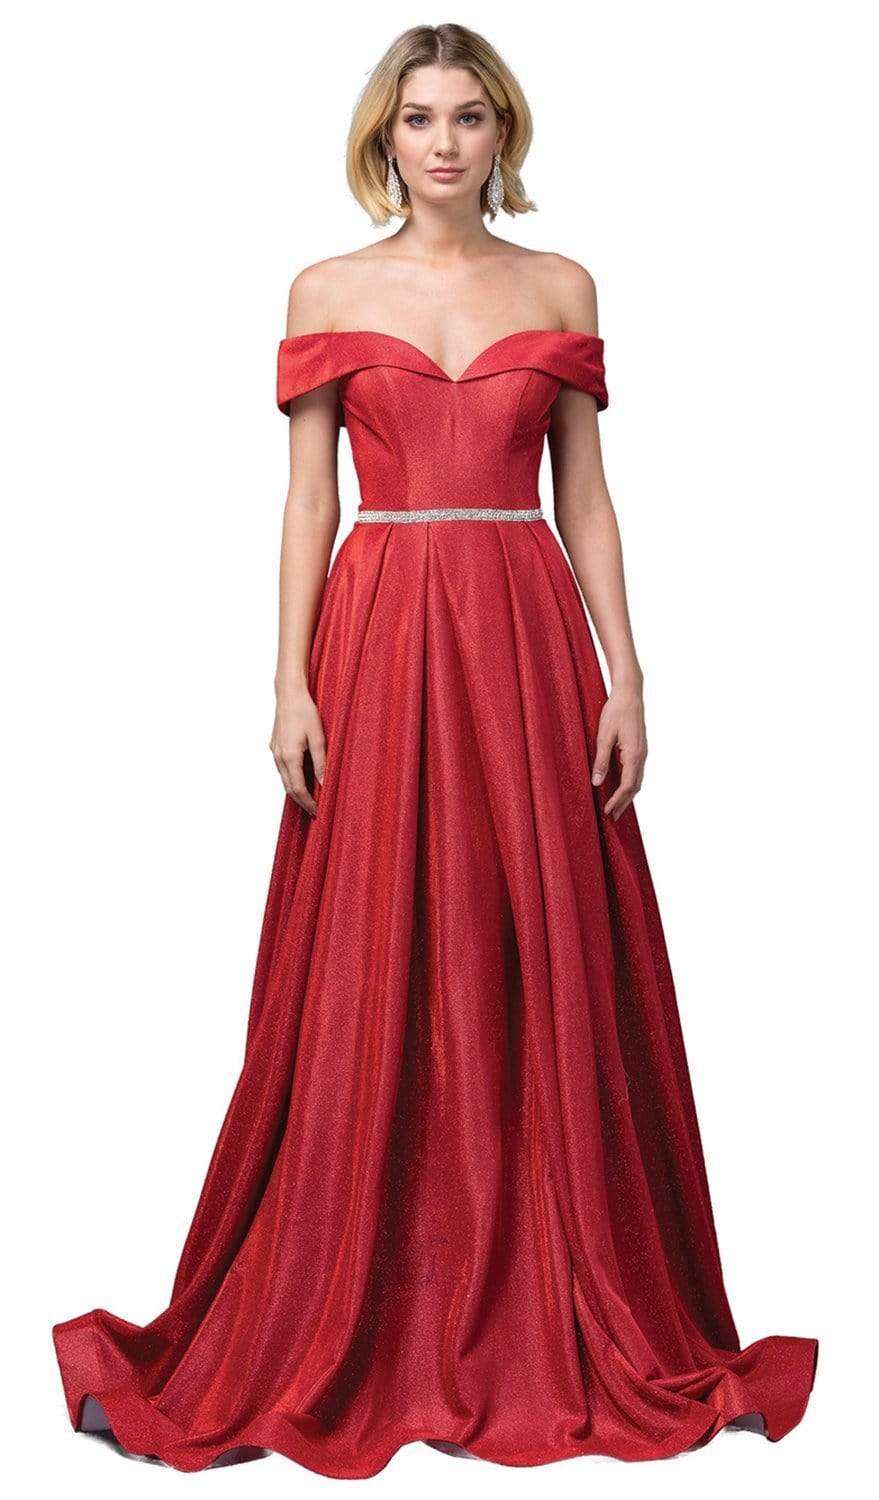 Dancing Queen - 2824 Iridescent Off Shoulder Gown with High Slit Evening Dresses XS / Red